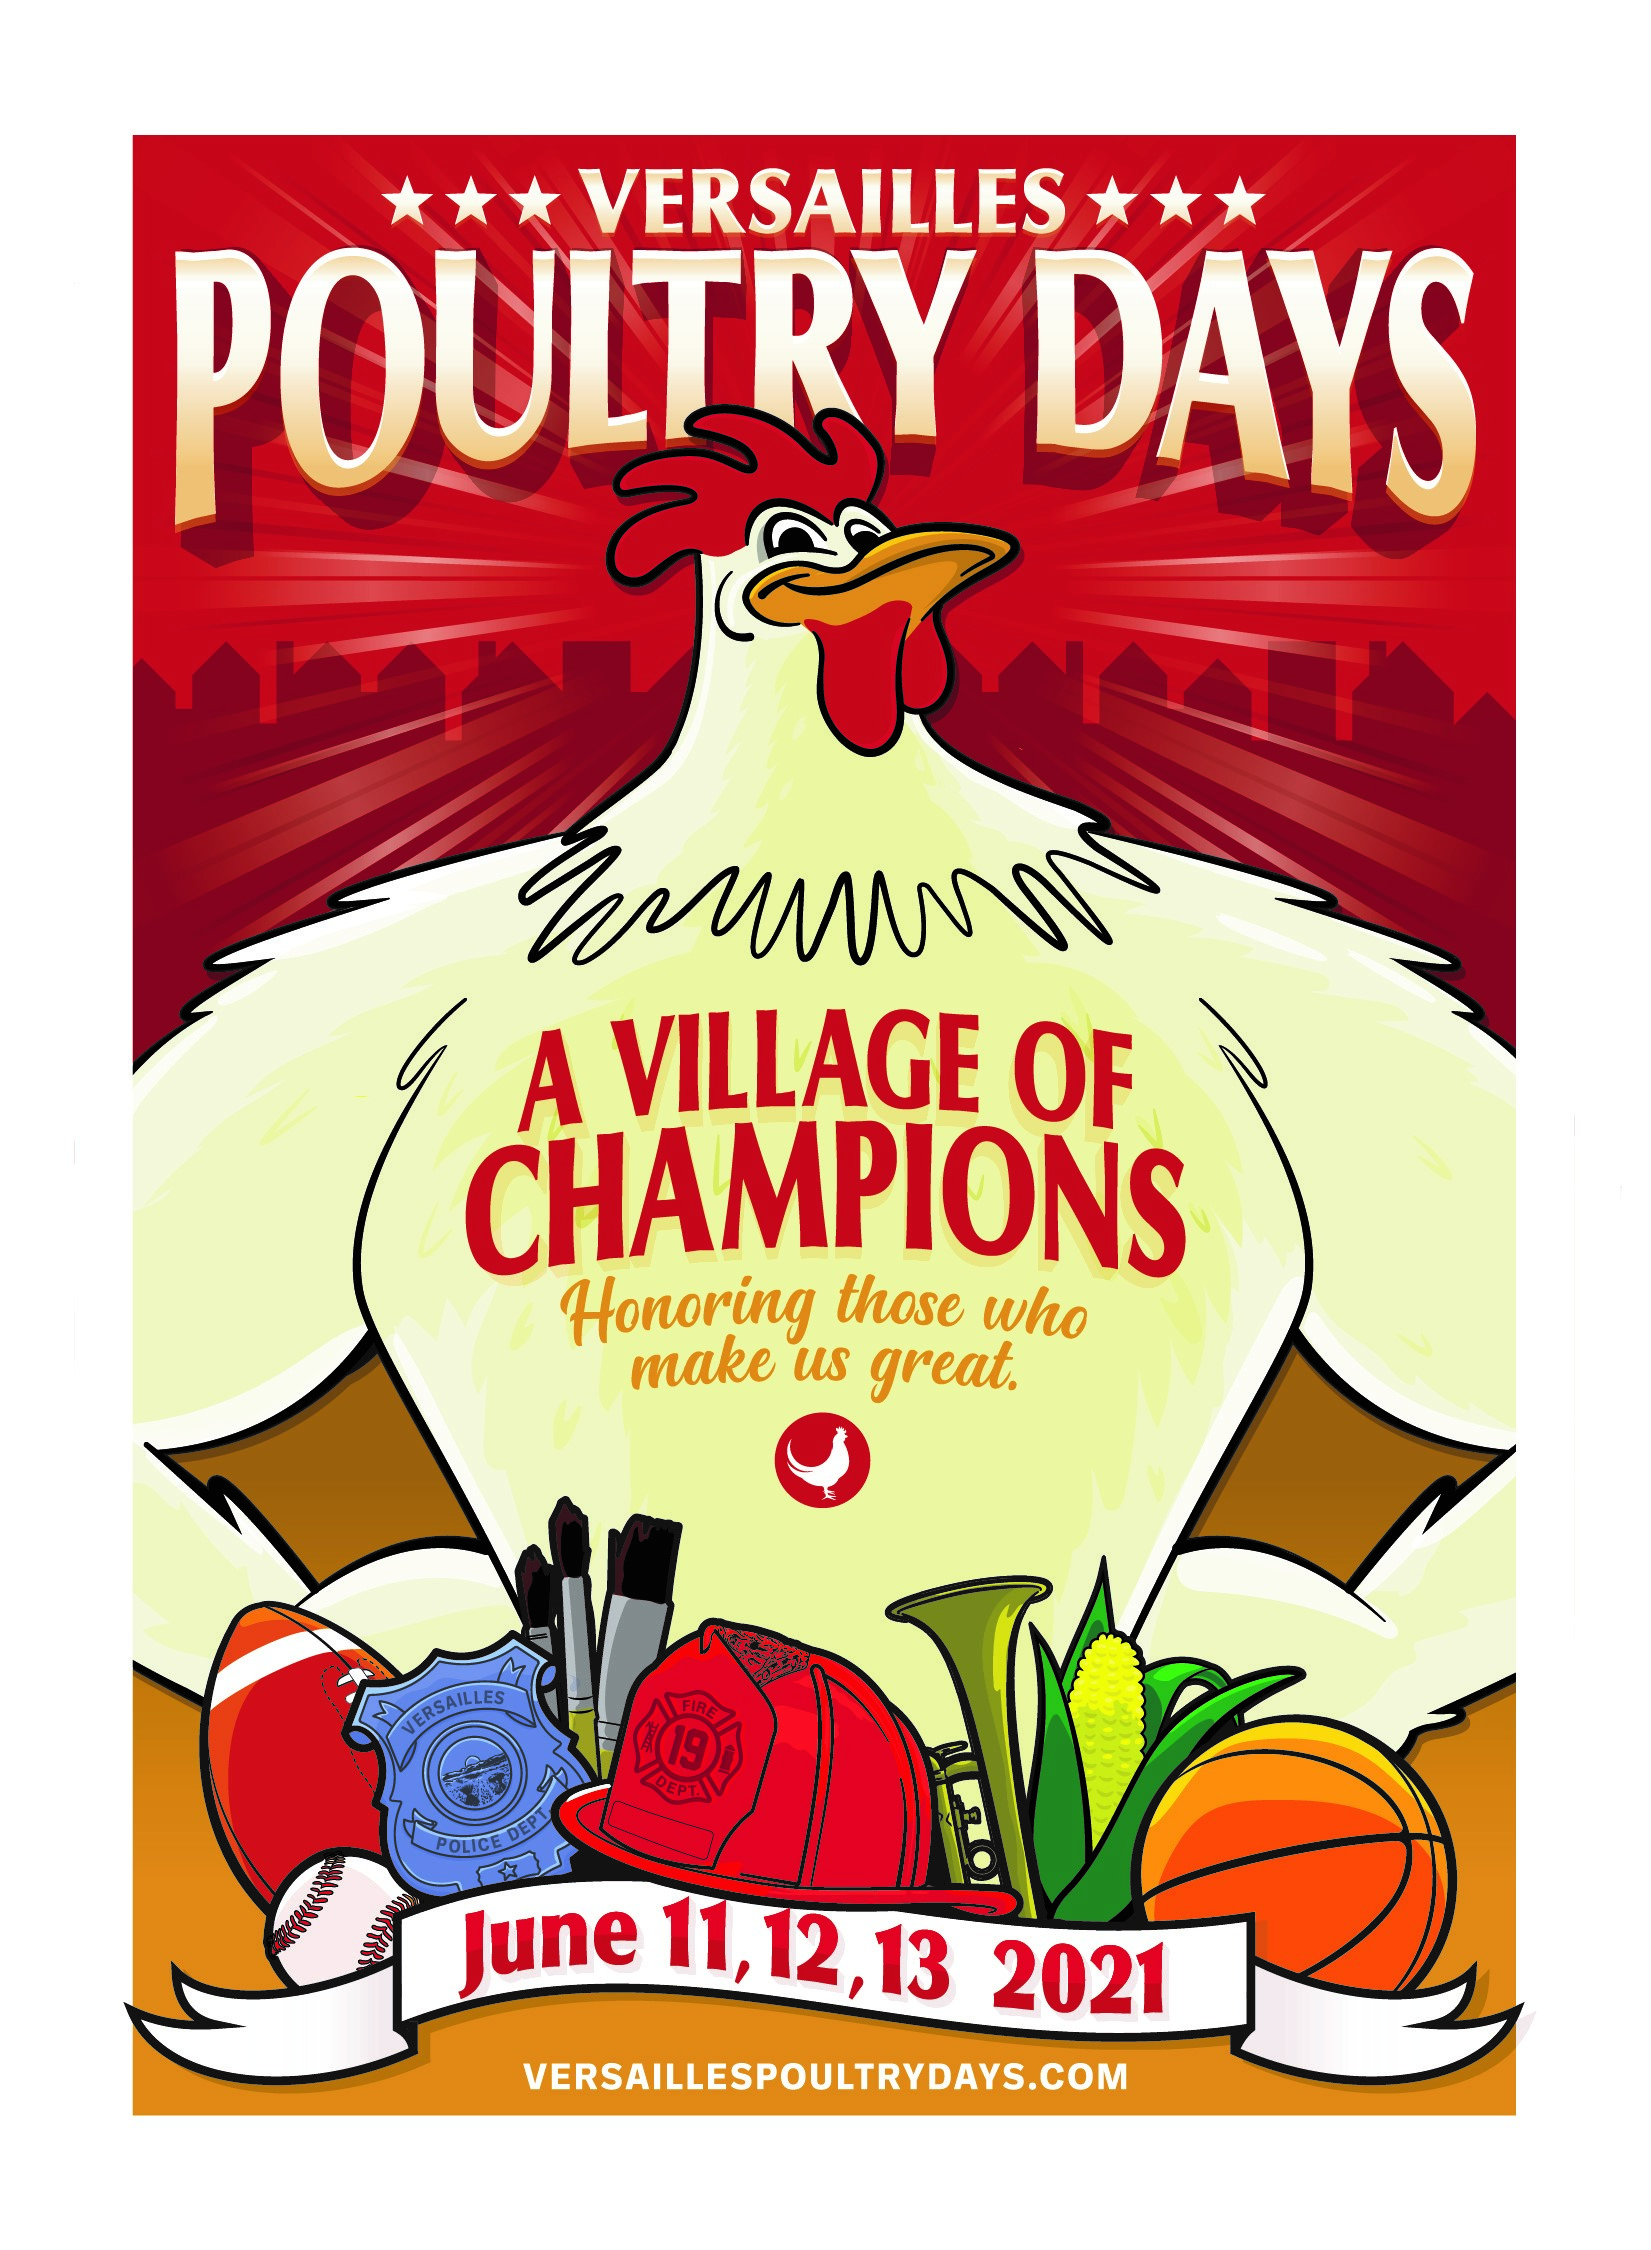 Versailles Poultry Days planning to return this summer WHIO TV 7 and